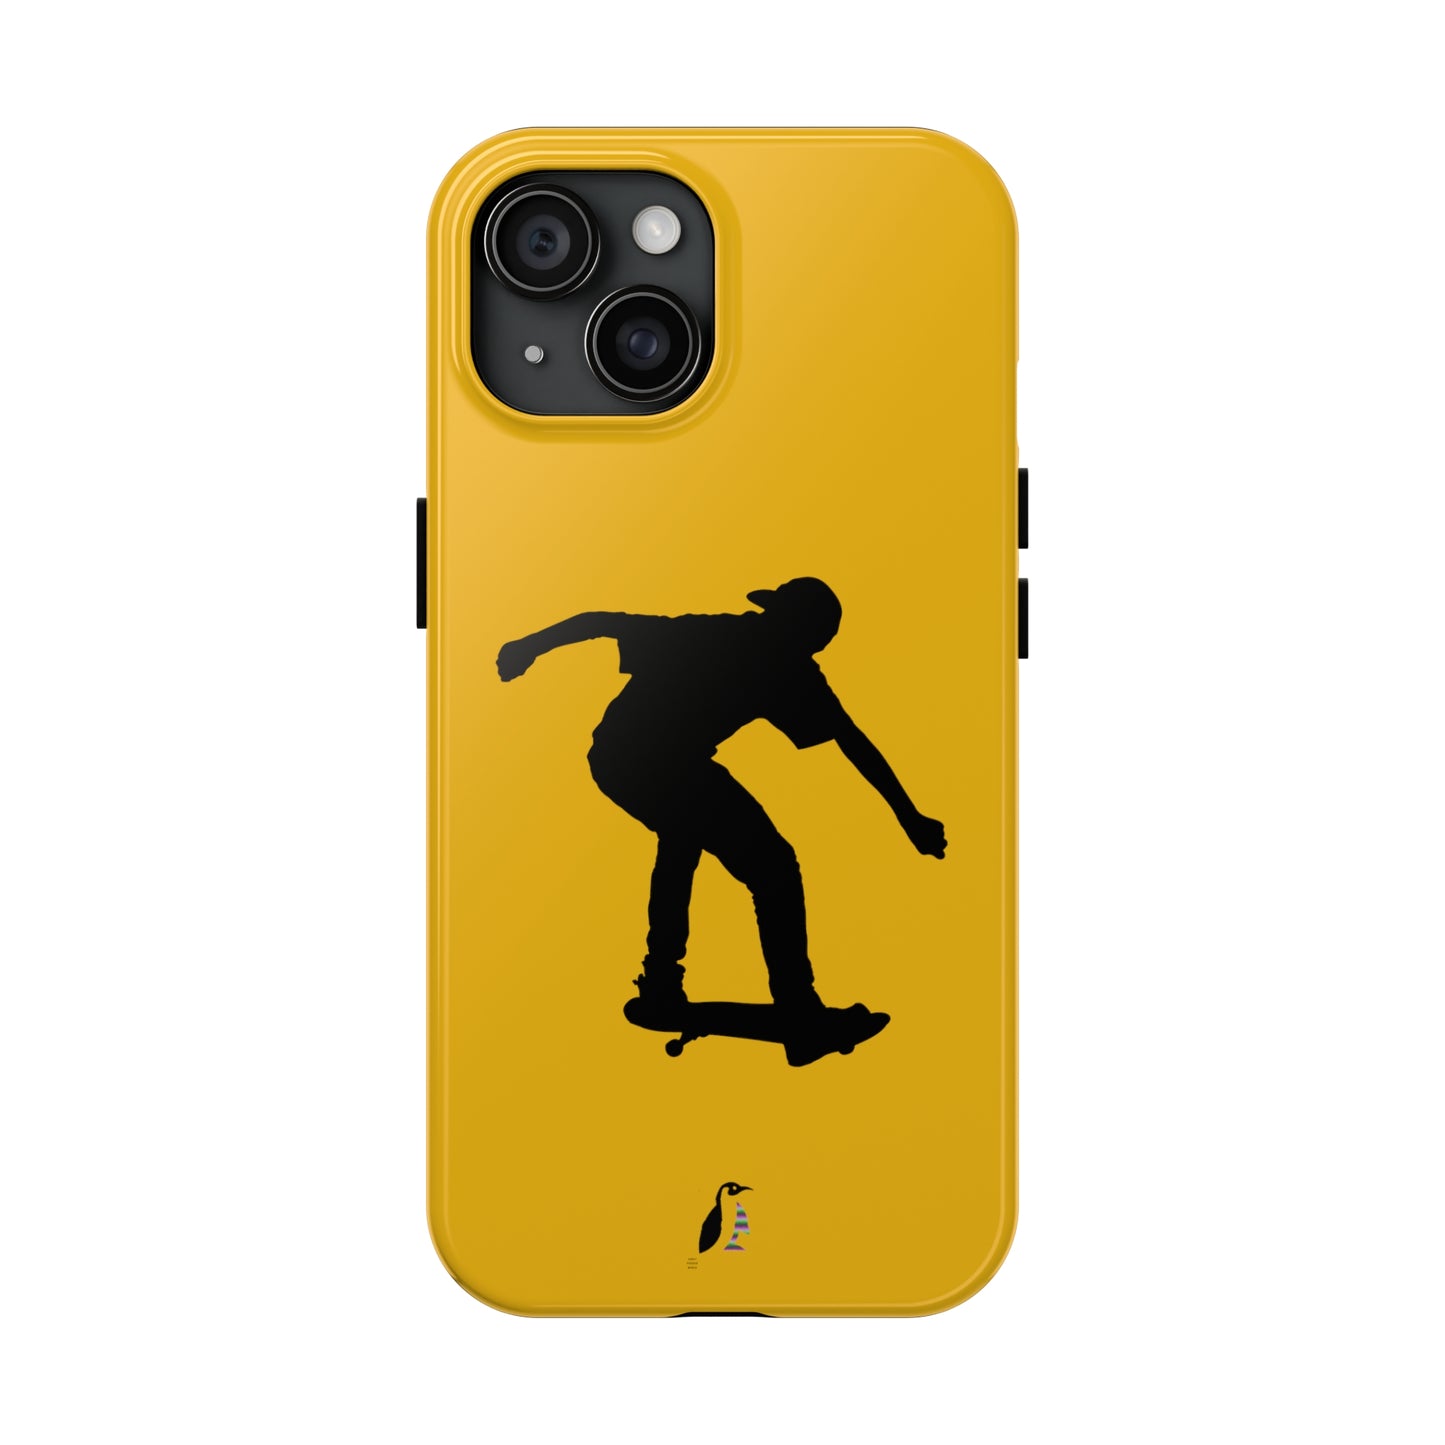 Tough Phone Cases (for iPhones): Skateboarding Yellow